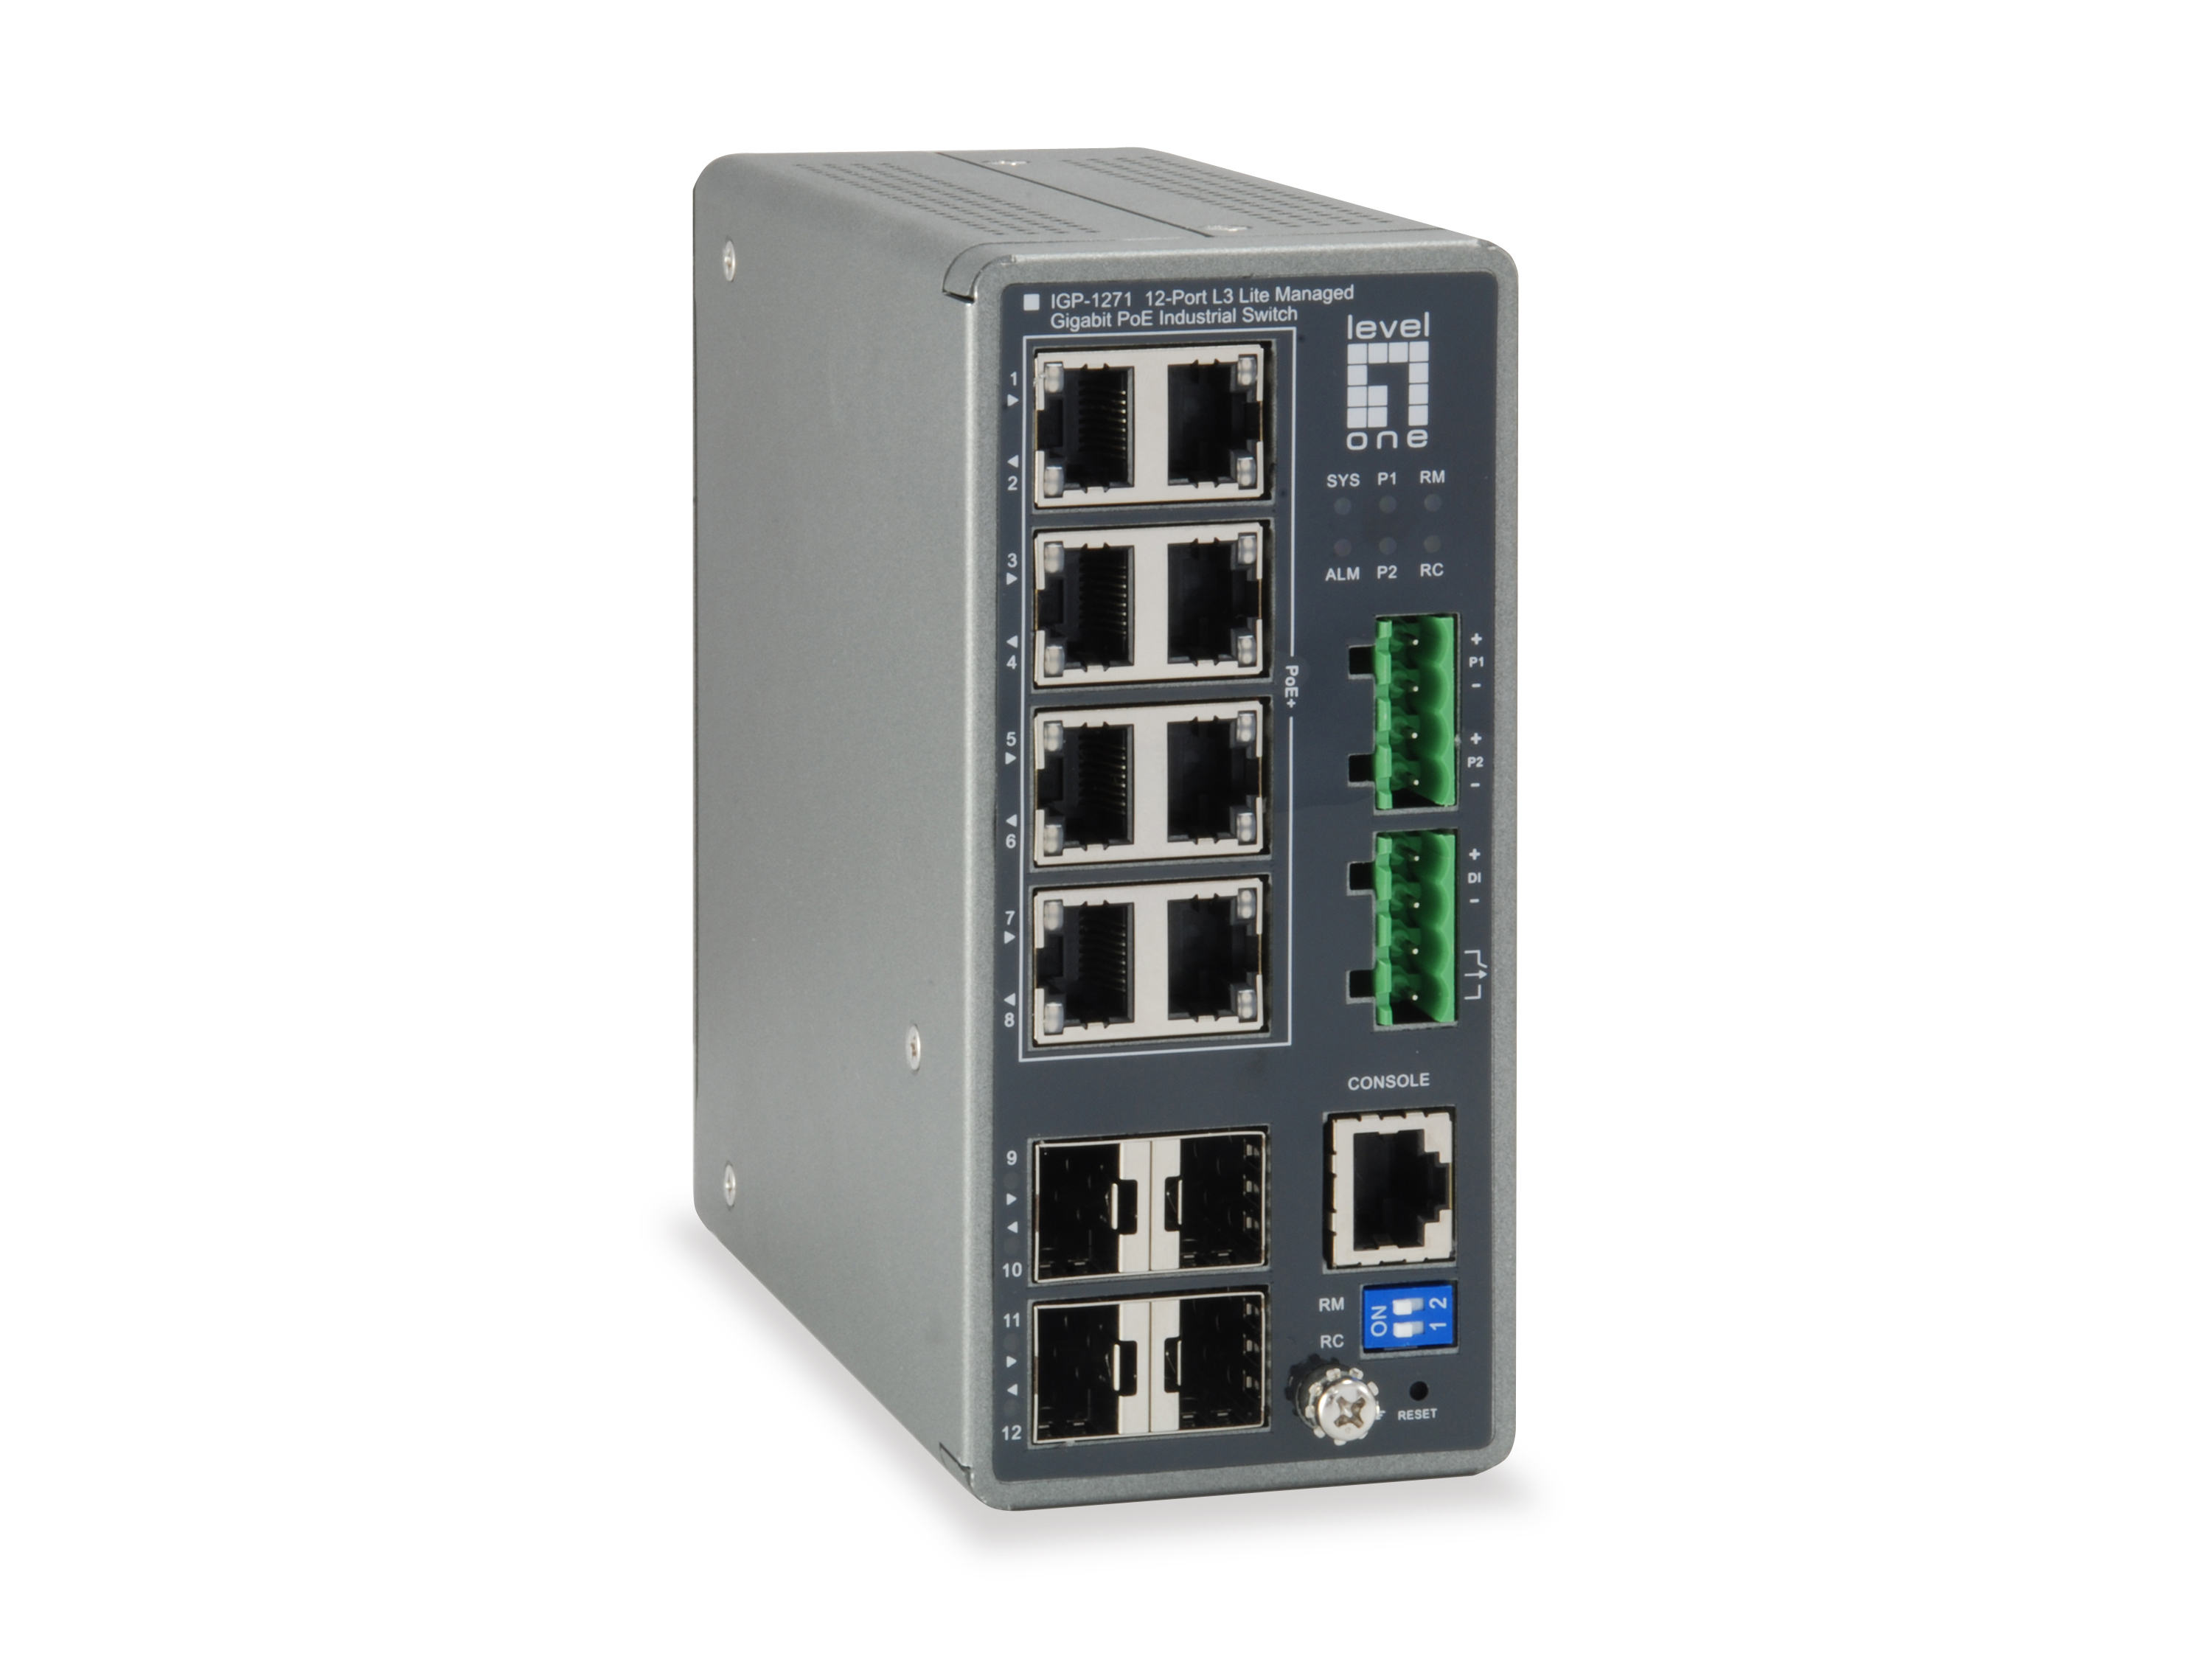 LevelOne TURING 12-Port L3 Lite Managed Gigabit Industrial Switch, 8 PoE Outputs, 240W, 802.3at/af PoE, 4 x SFP, -40°C to 75°C